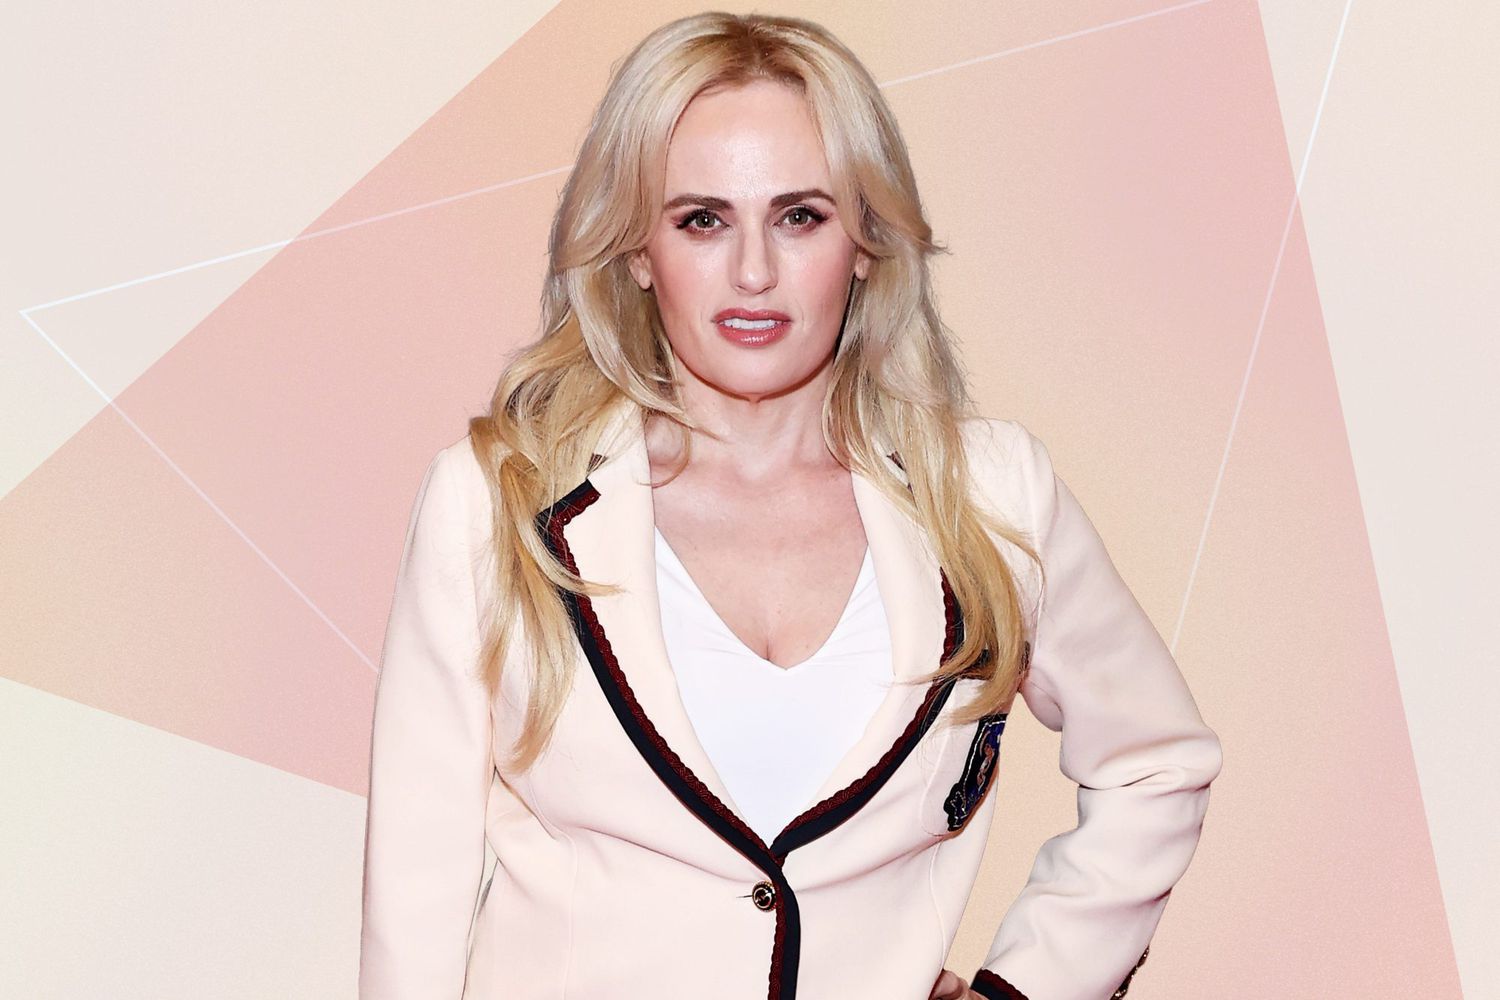 Rebel wilson wearing a pink suit against a neutral background